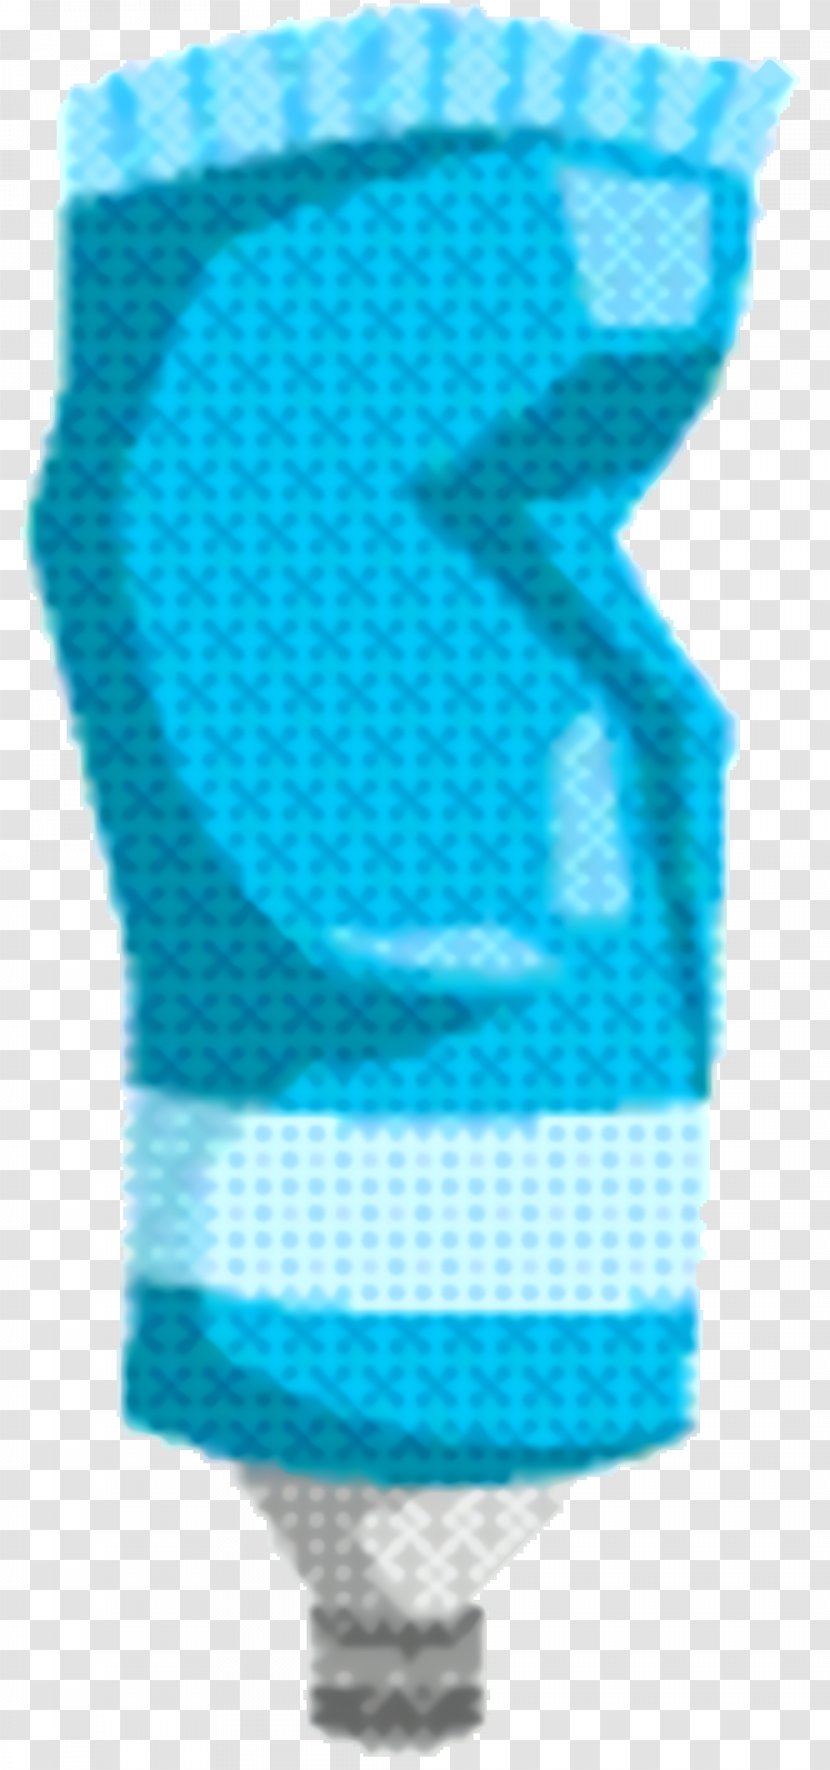 Gear Background - Teal - Bottle Personal Protective Equipment Transparent PNG